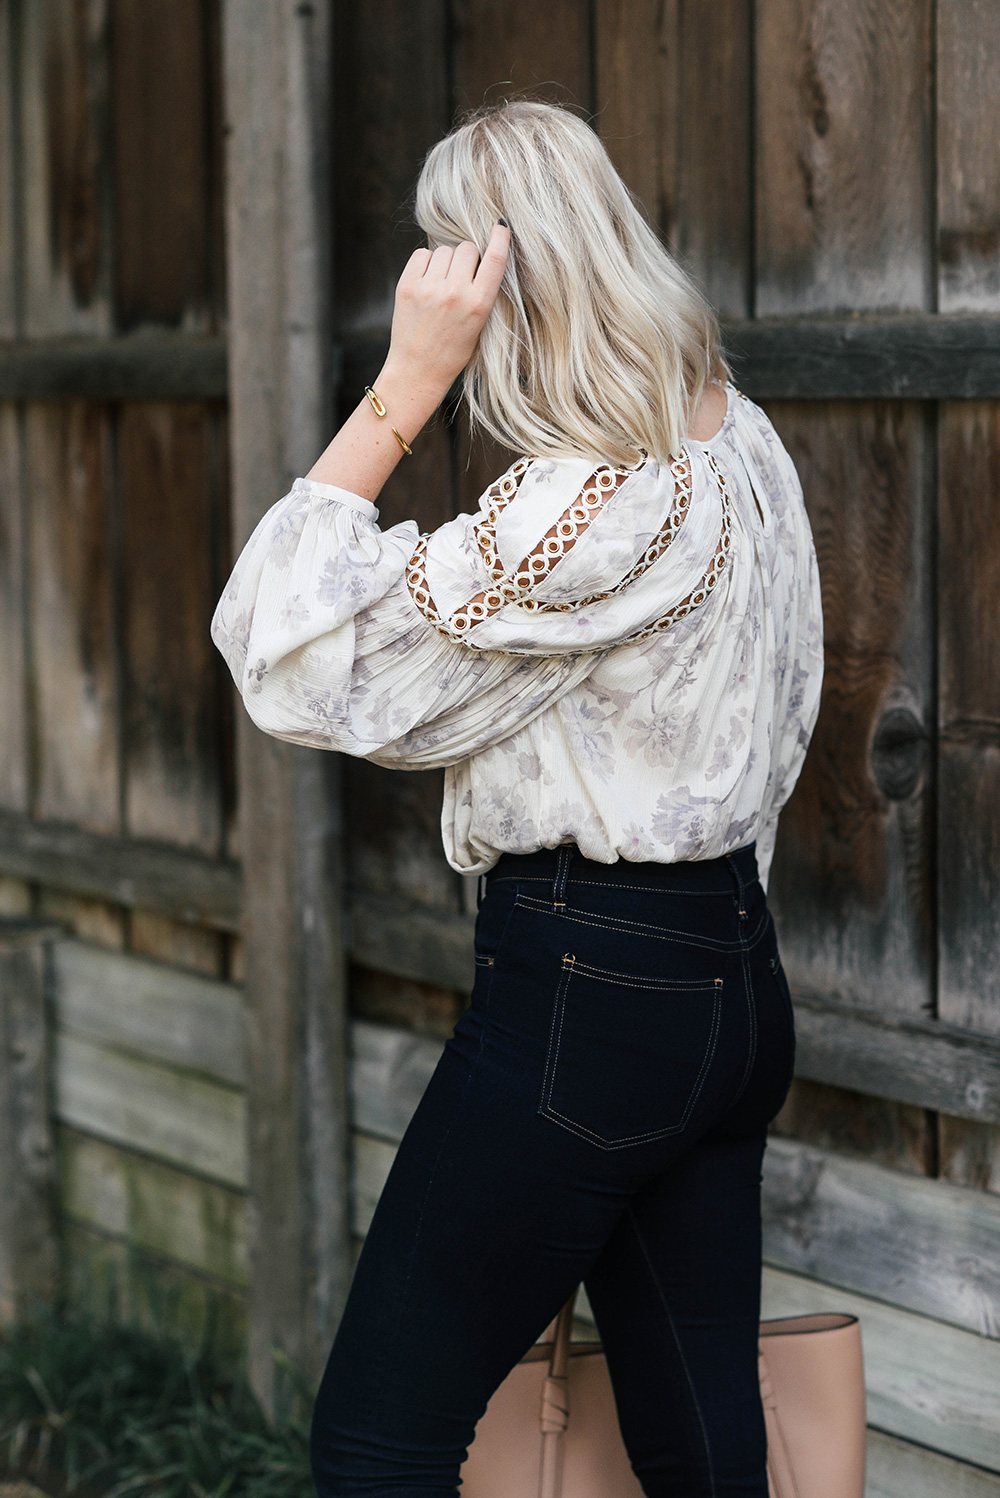 Topshop Grommet Detail Blouse | The Style Scribe